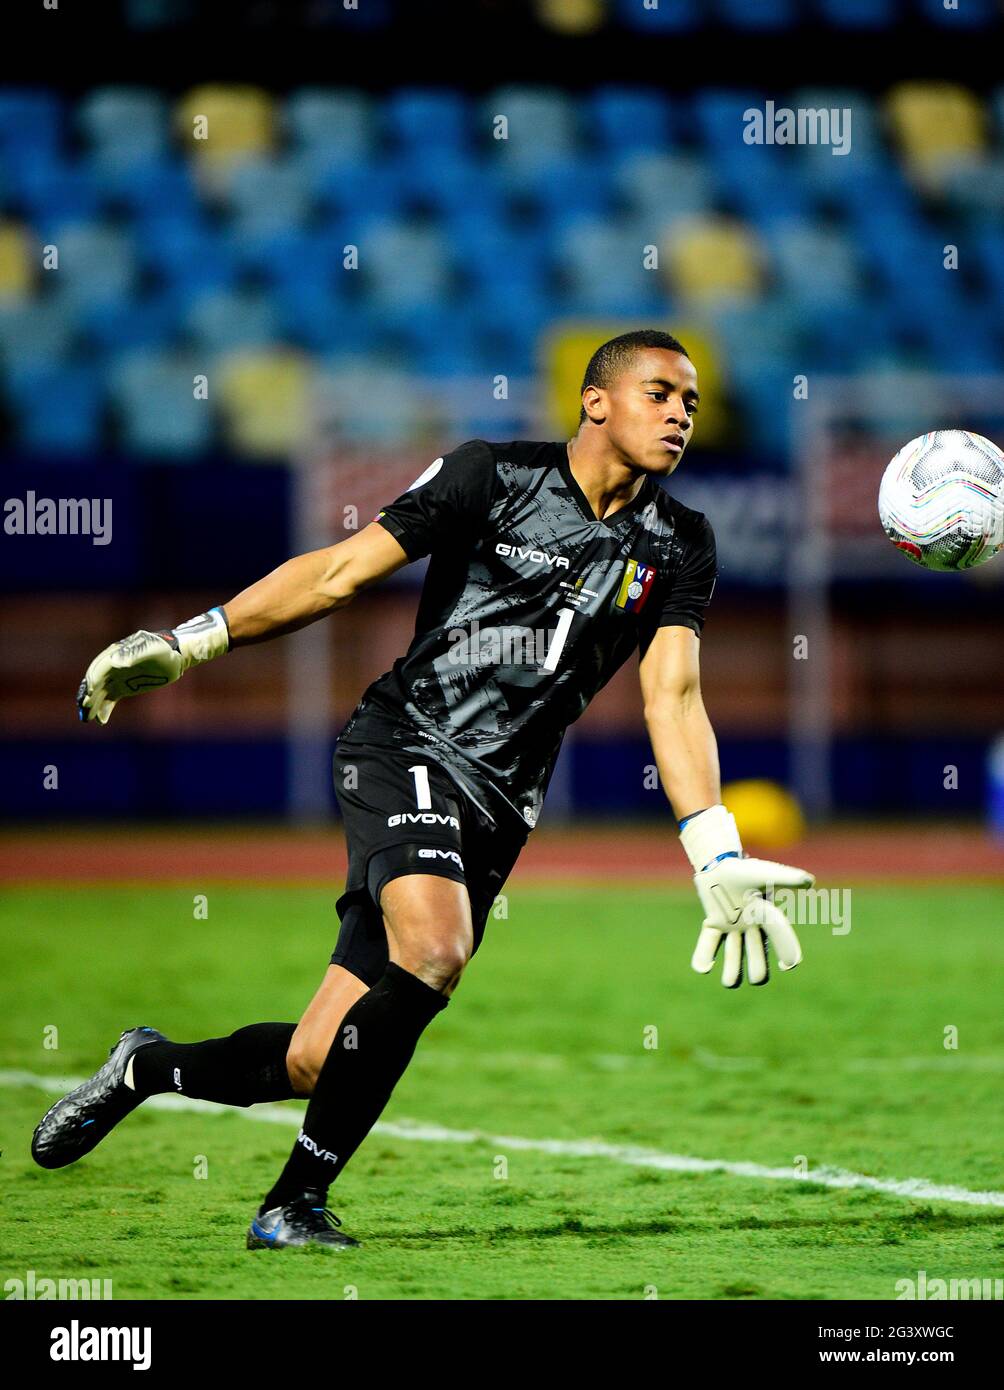 GOIANIA, BRAZIL - JUNE 17: Wuilker Farinez of Venezuela in action ,during the match between Colombia and Venezuela as part of Conmebol Copa America Brazil 2021 at Estadio Olimpico on June 17, 2021 in Goiania, Brazil. (Photo by MB Media) Stock Photo